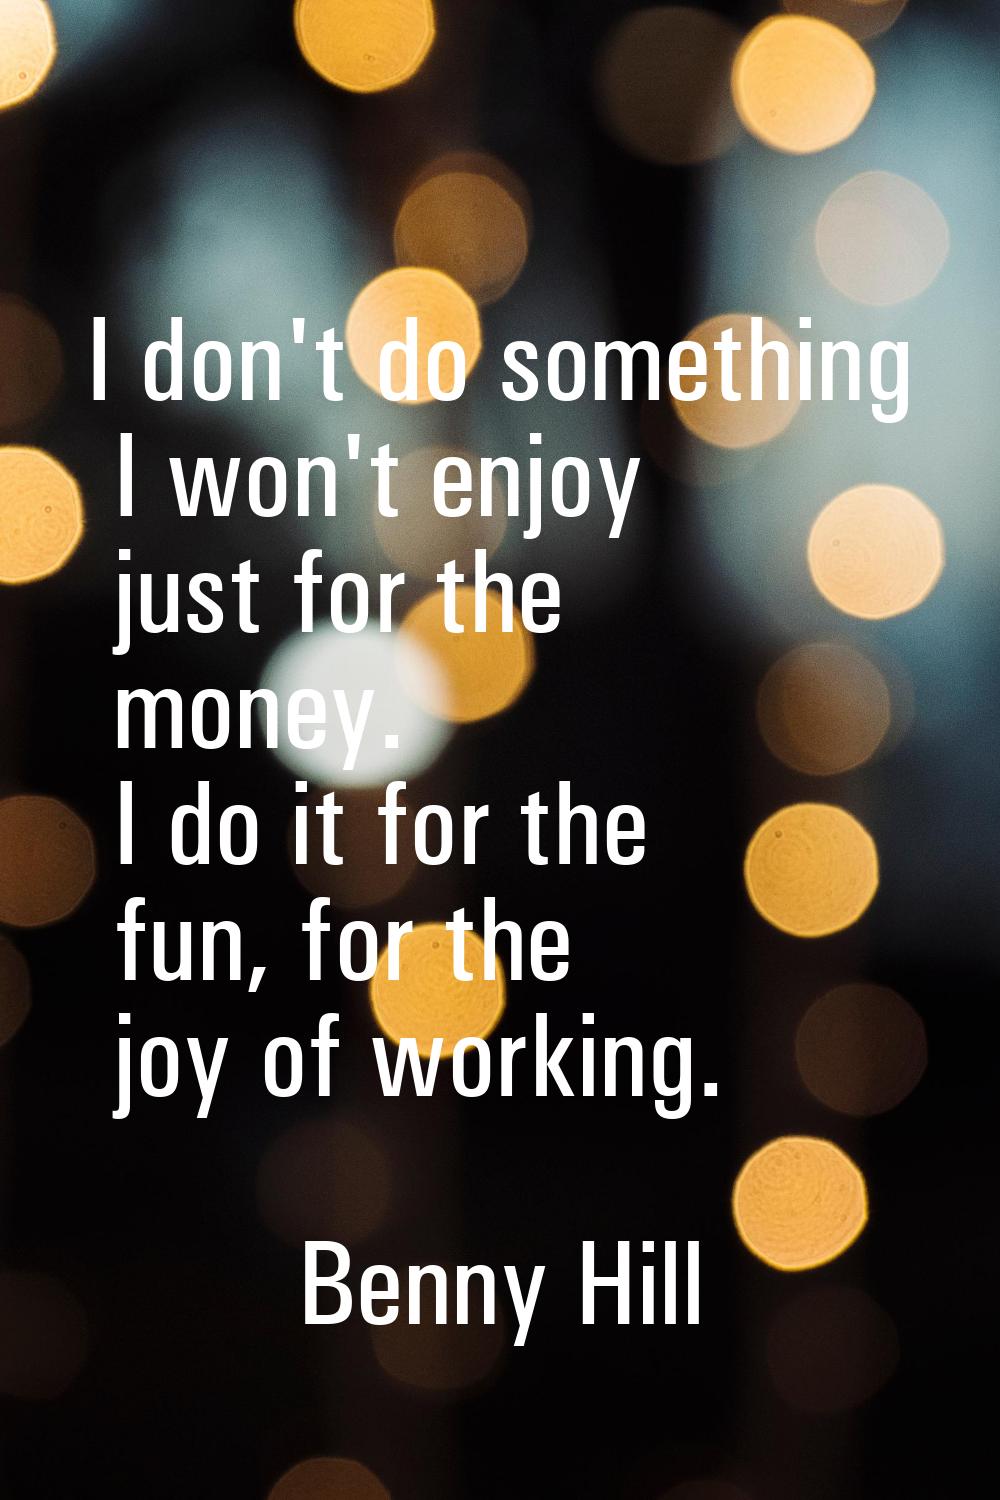 I don't do something I won't enjoy just for the money. I do it for the fun, for the joy of working.